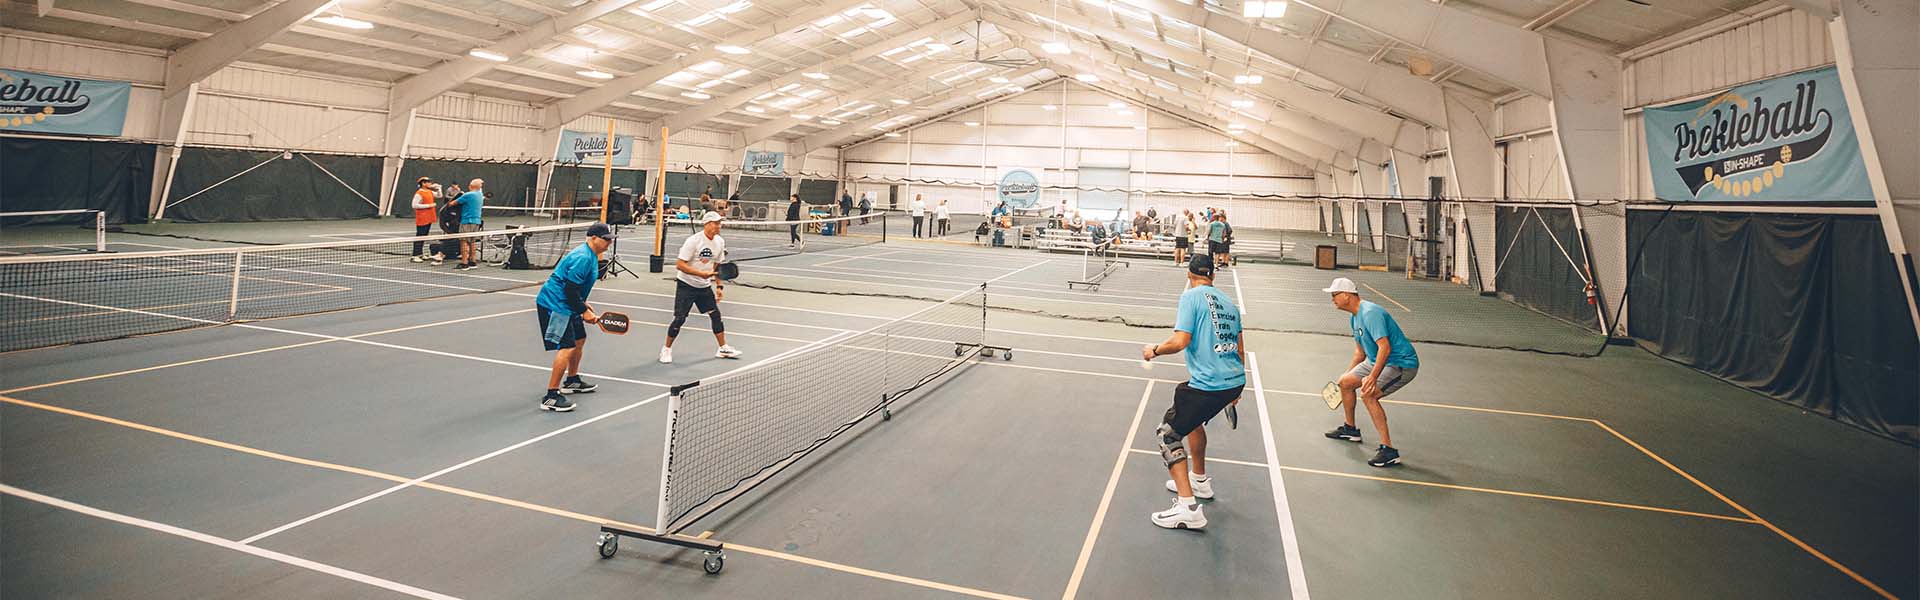 Pickleball Tournaments and Events in California